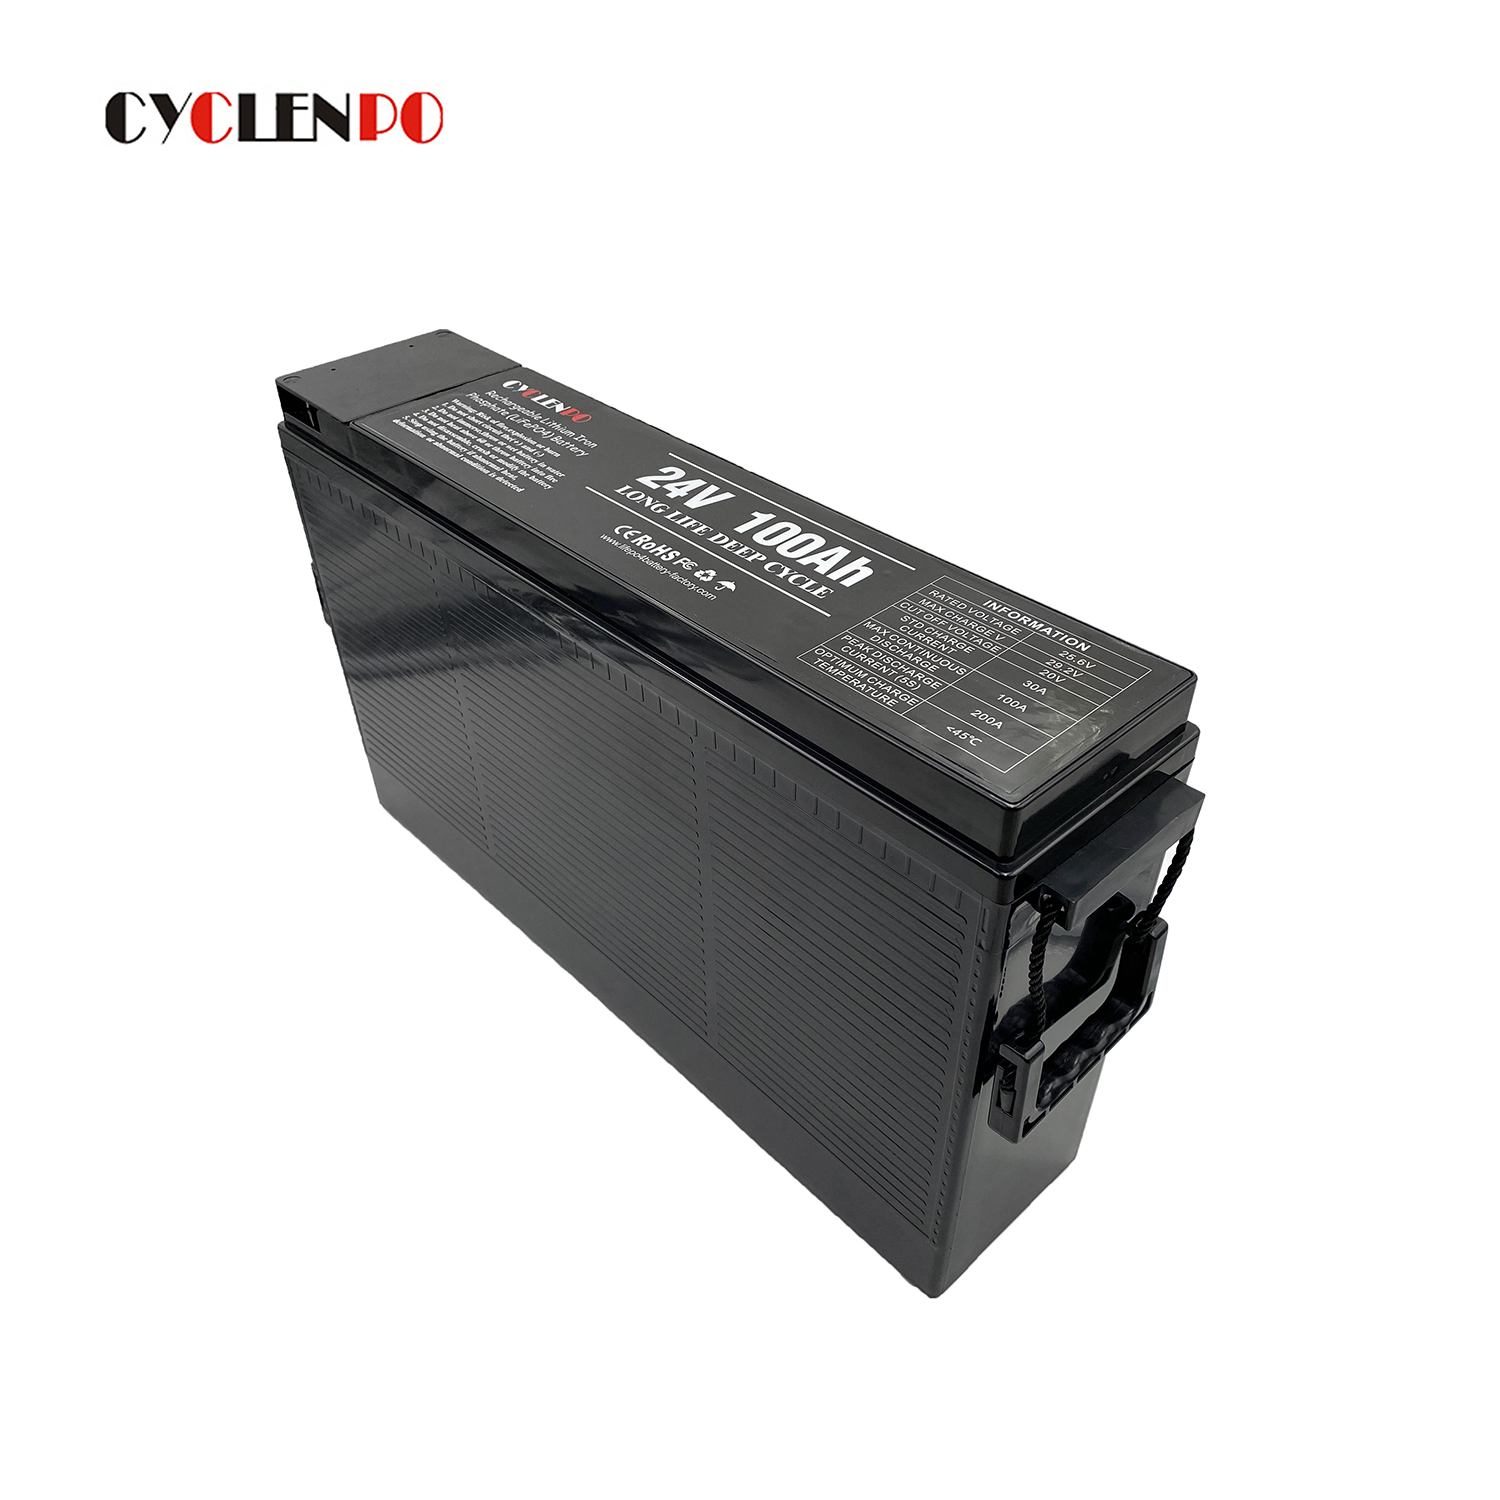 Deep Cycle 24V 100Ah Lifepo4 battery with BMS Lithium Ion Battery Pack For Electric Golf Cart Rv Marine